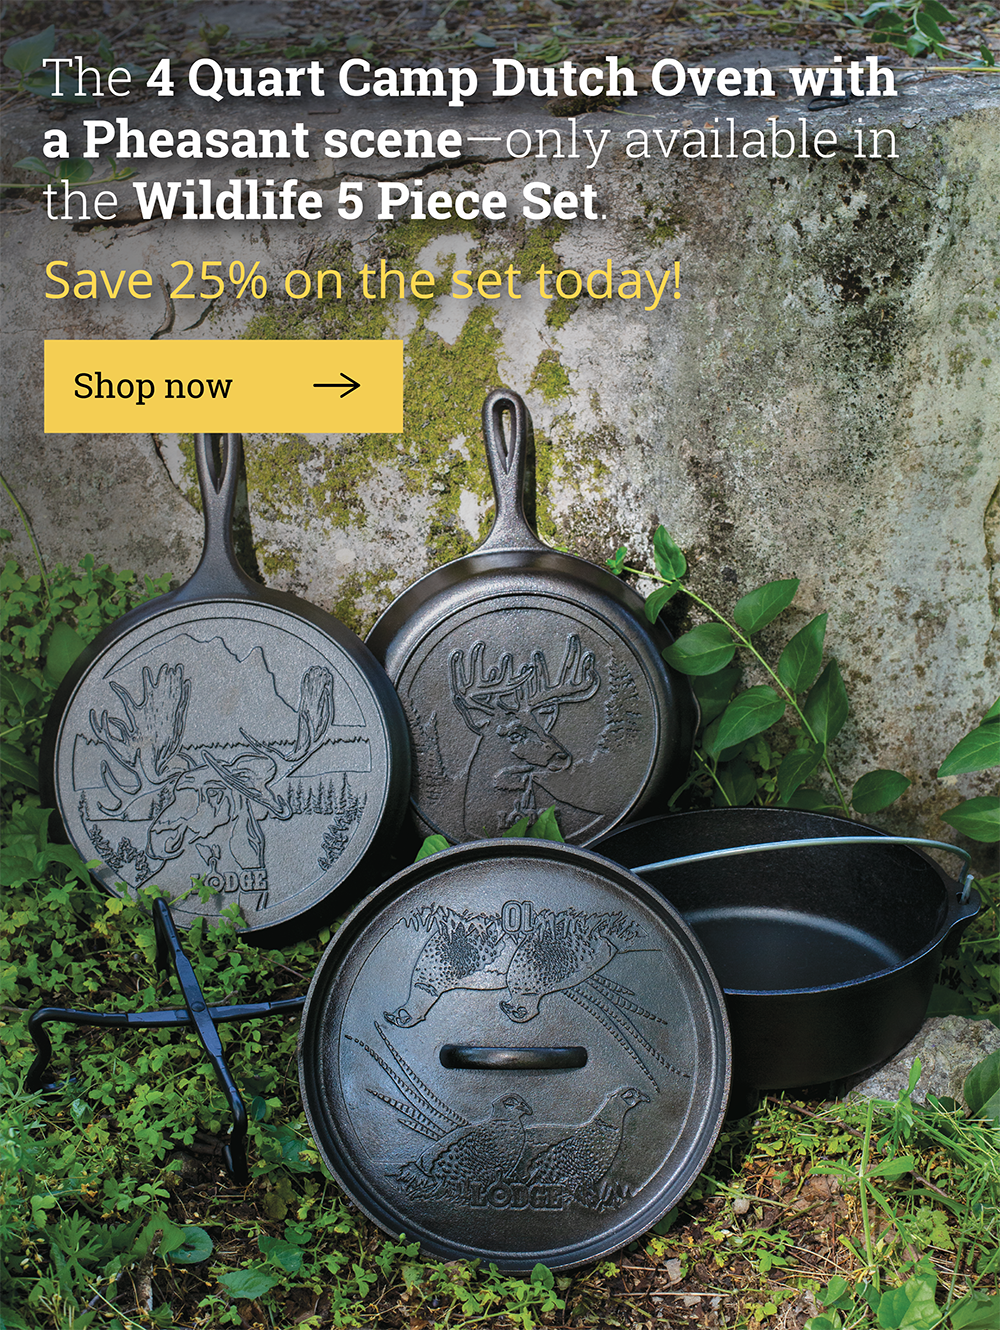 Save 25% on the Wildlife Set today!